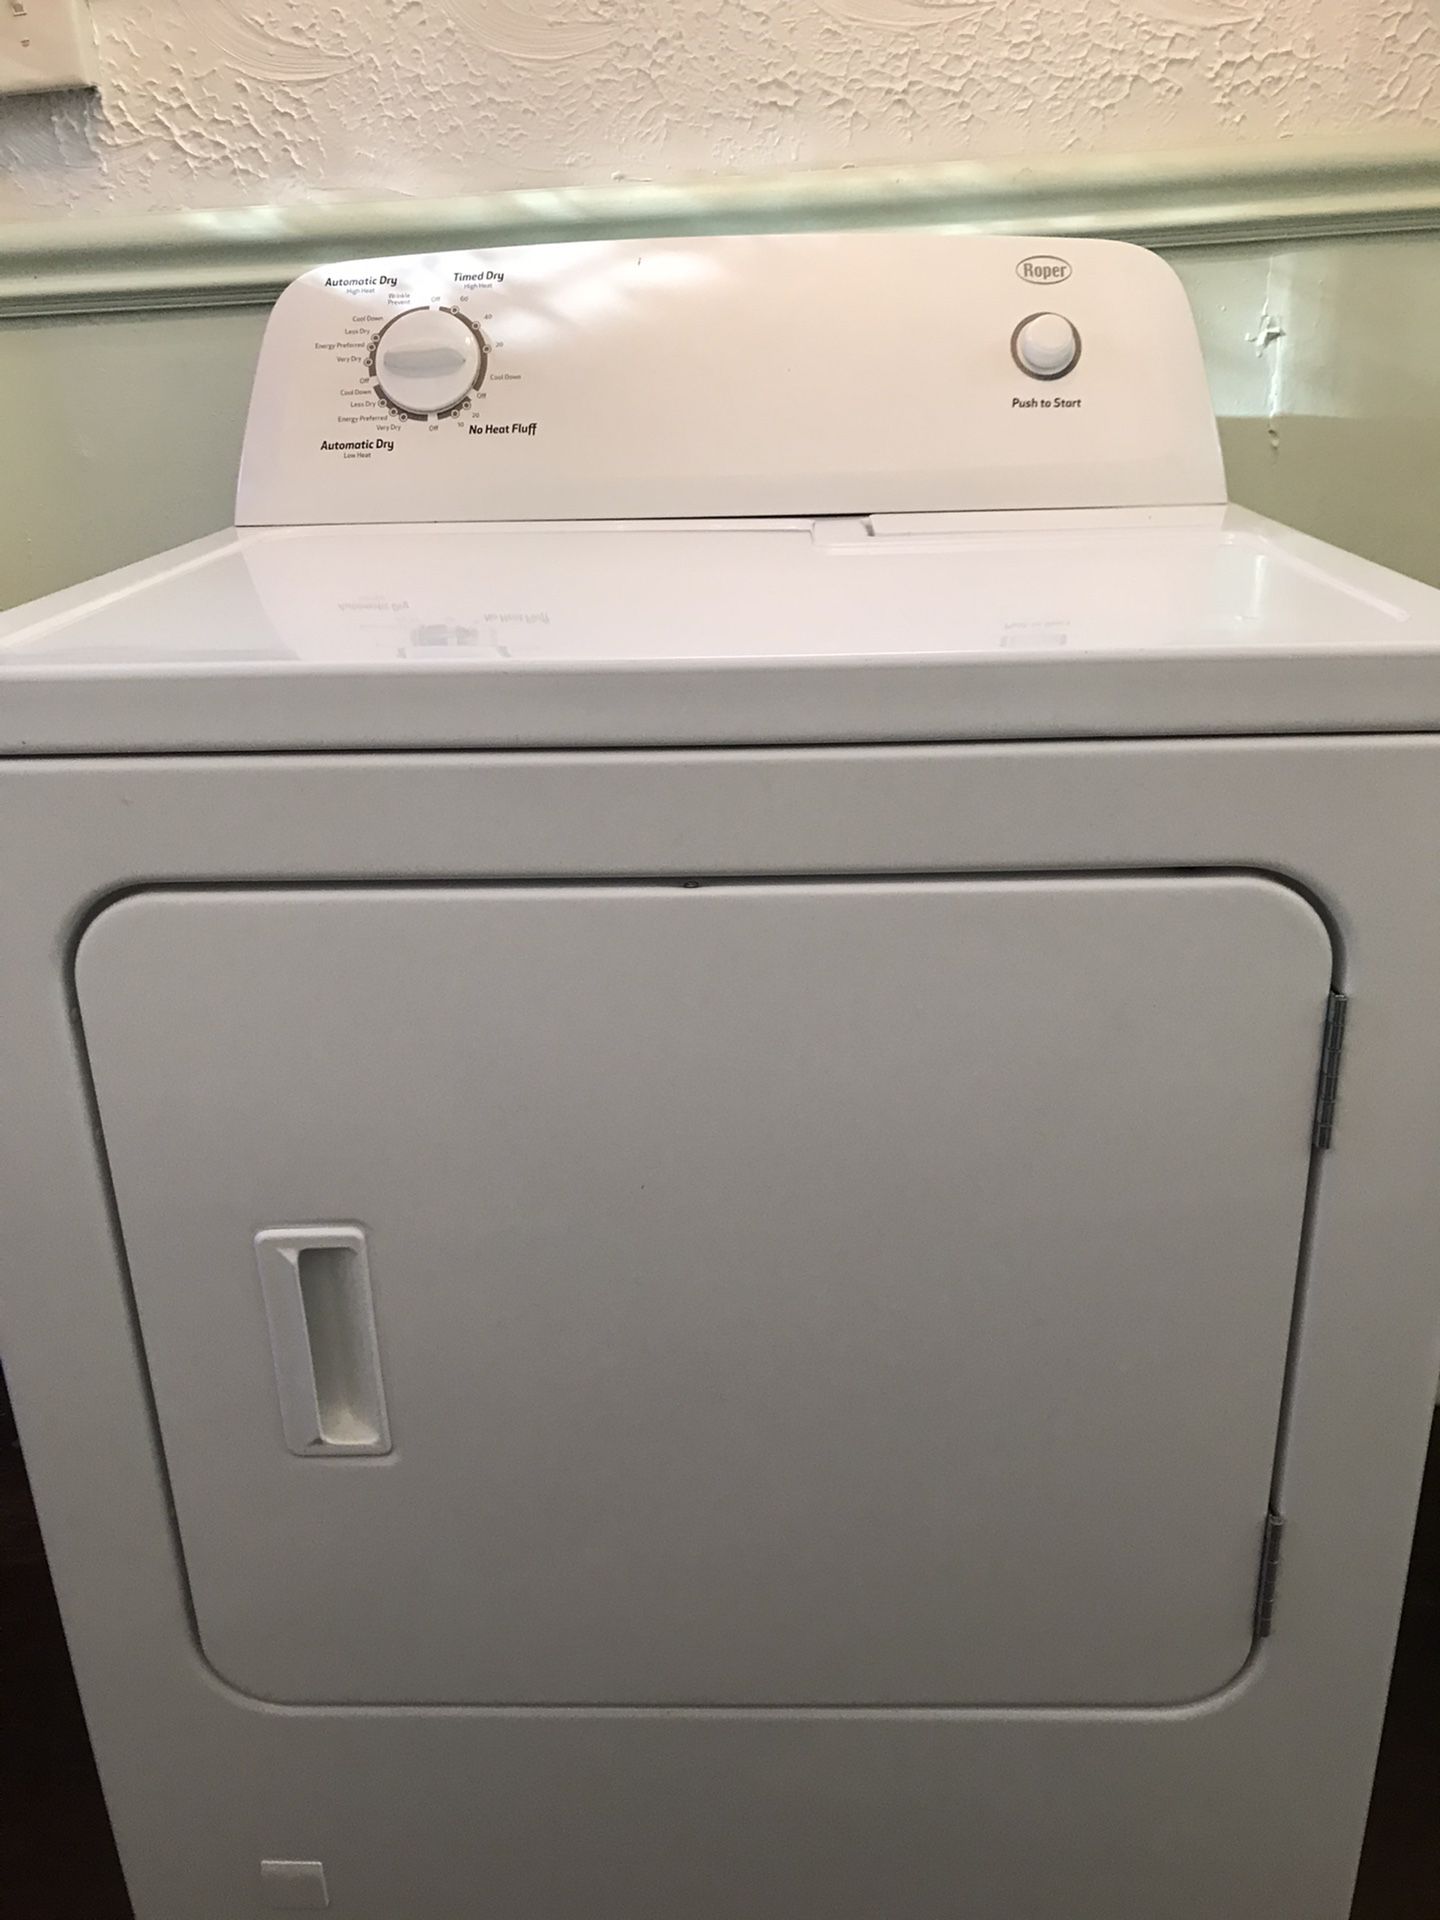 Roper Amana Dryer With Wrinkle Protection 